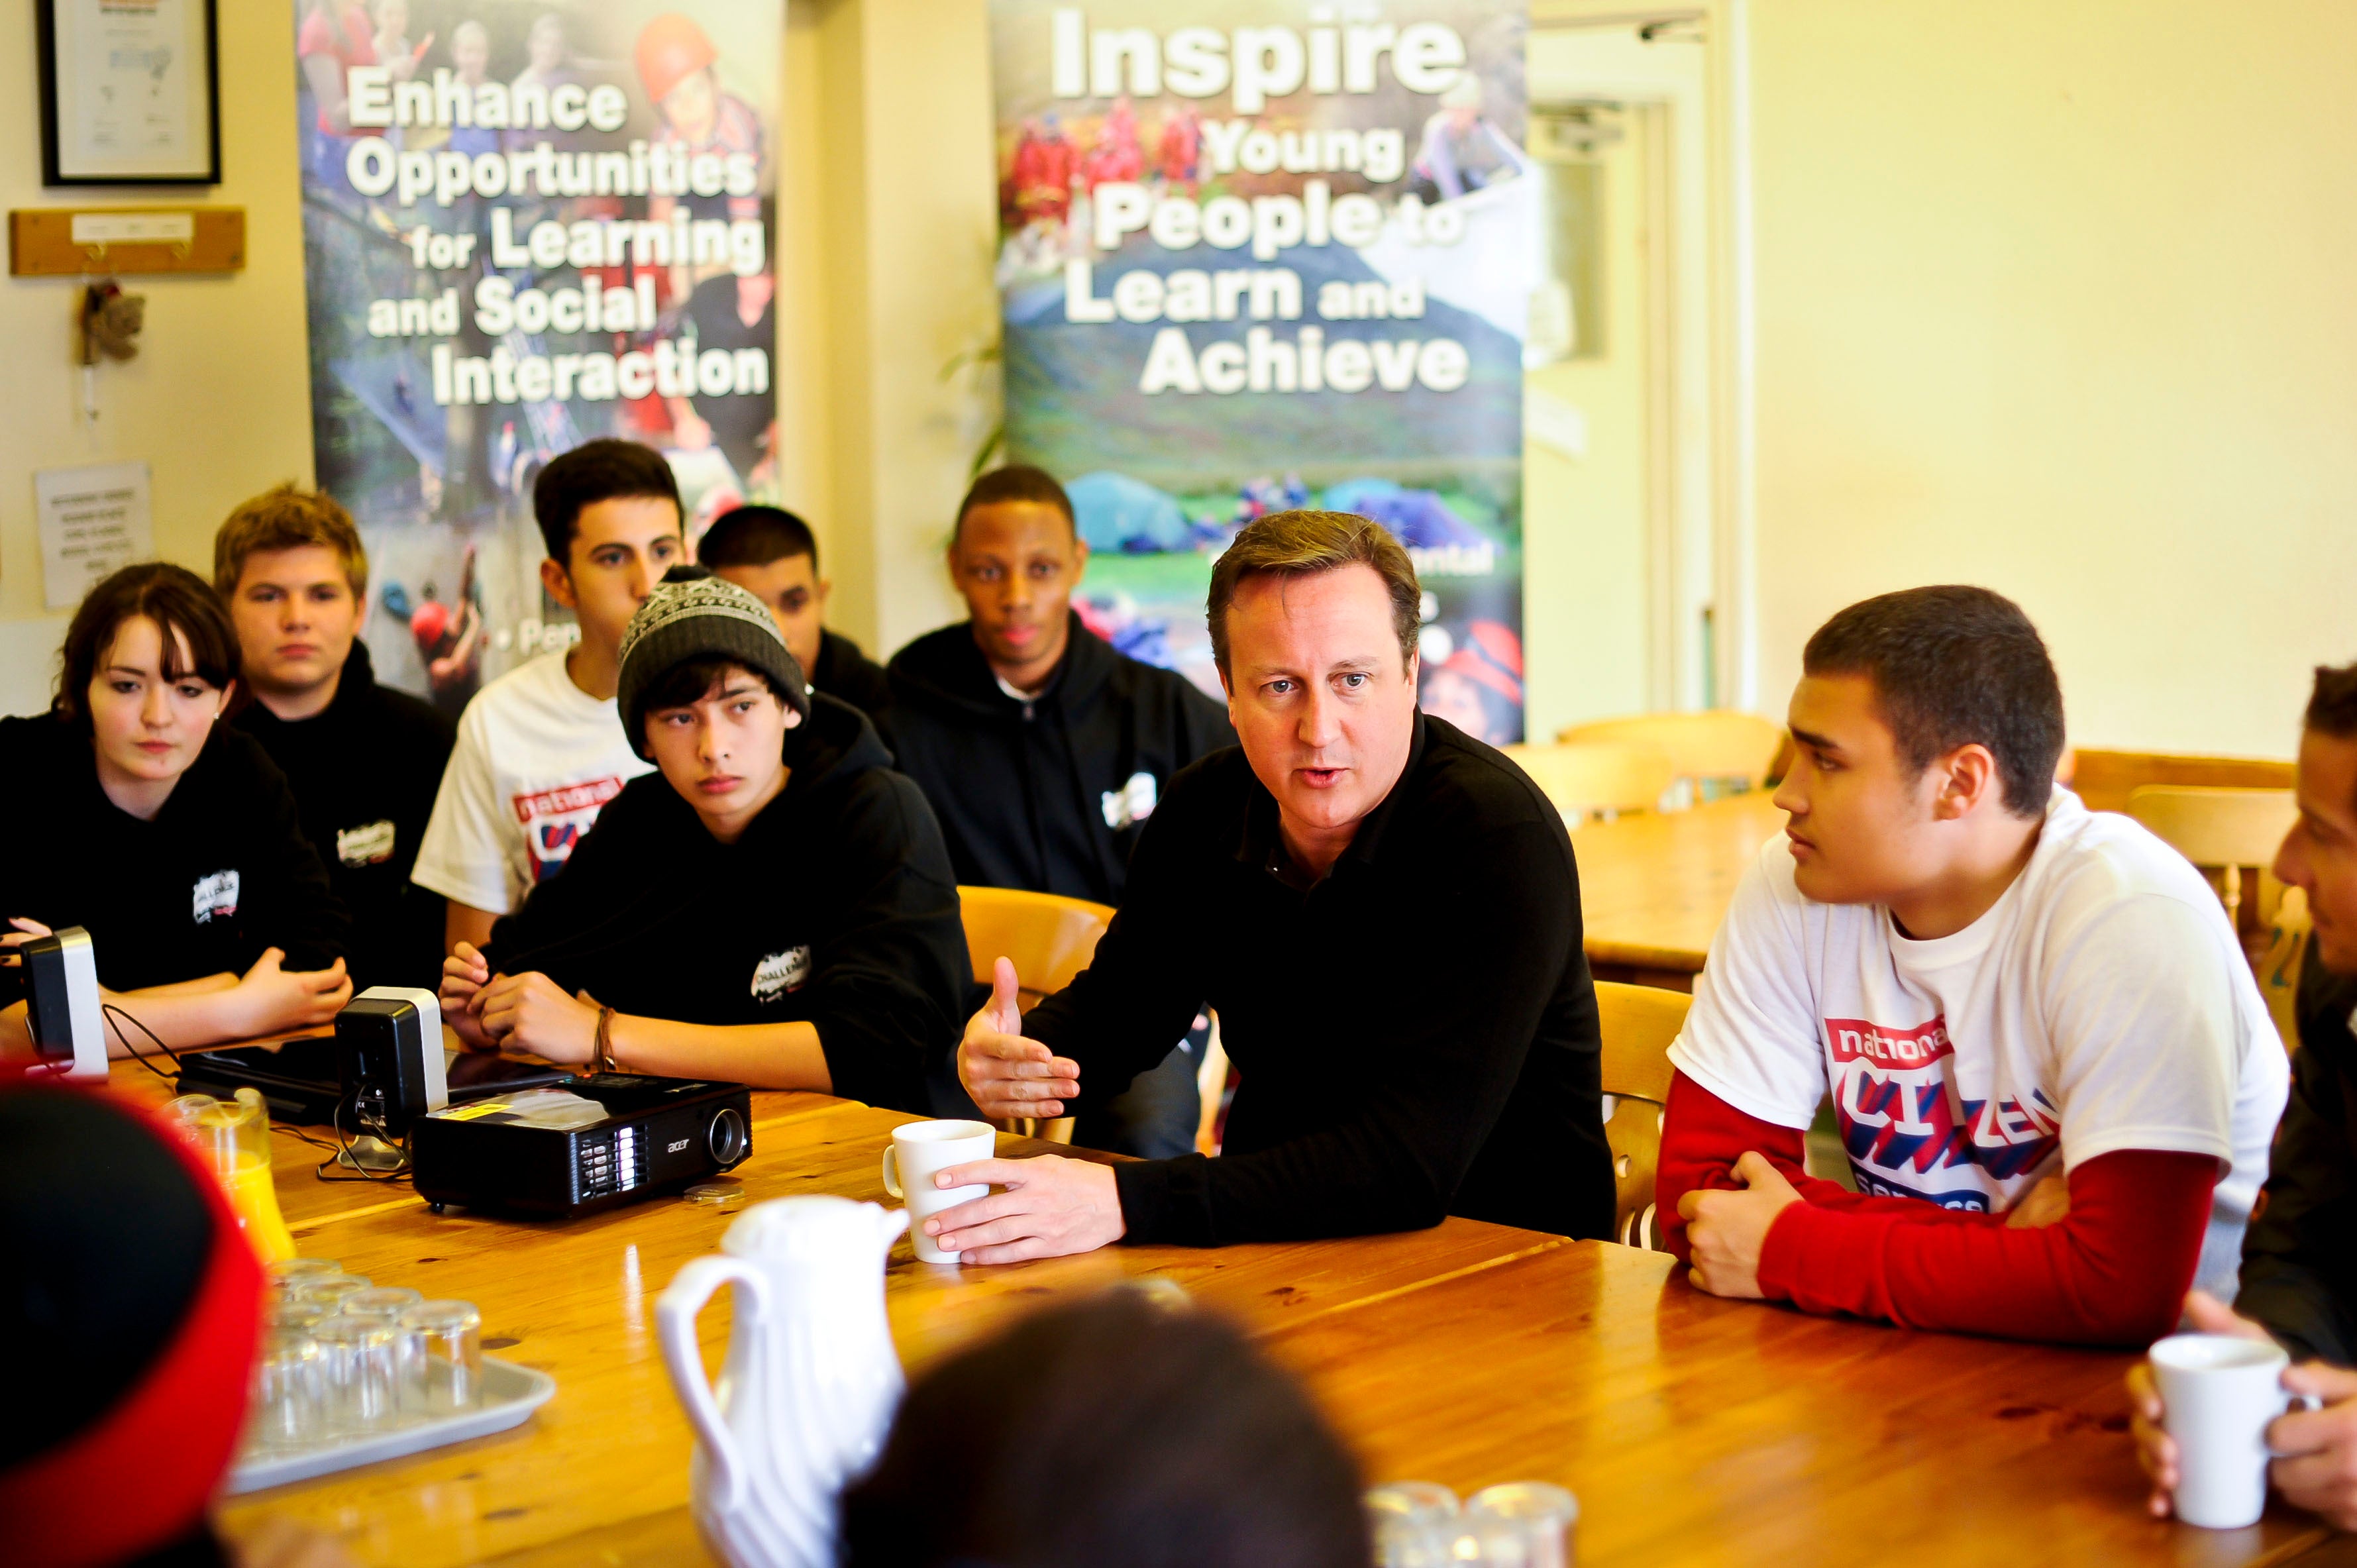 David Cameron pictured in 2012 speaking to people on the National Citizen Service scheme